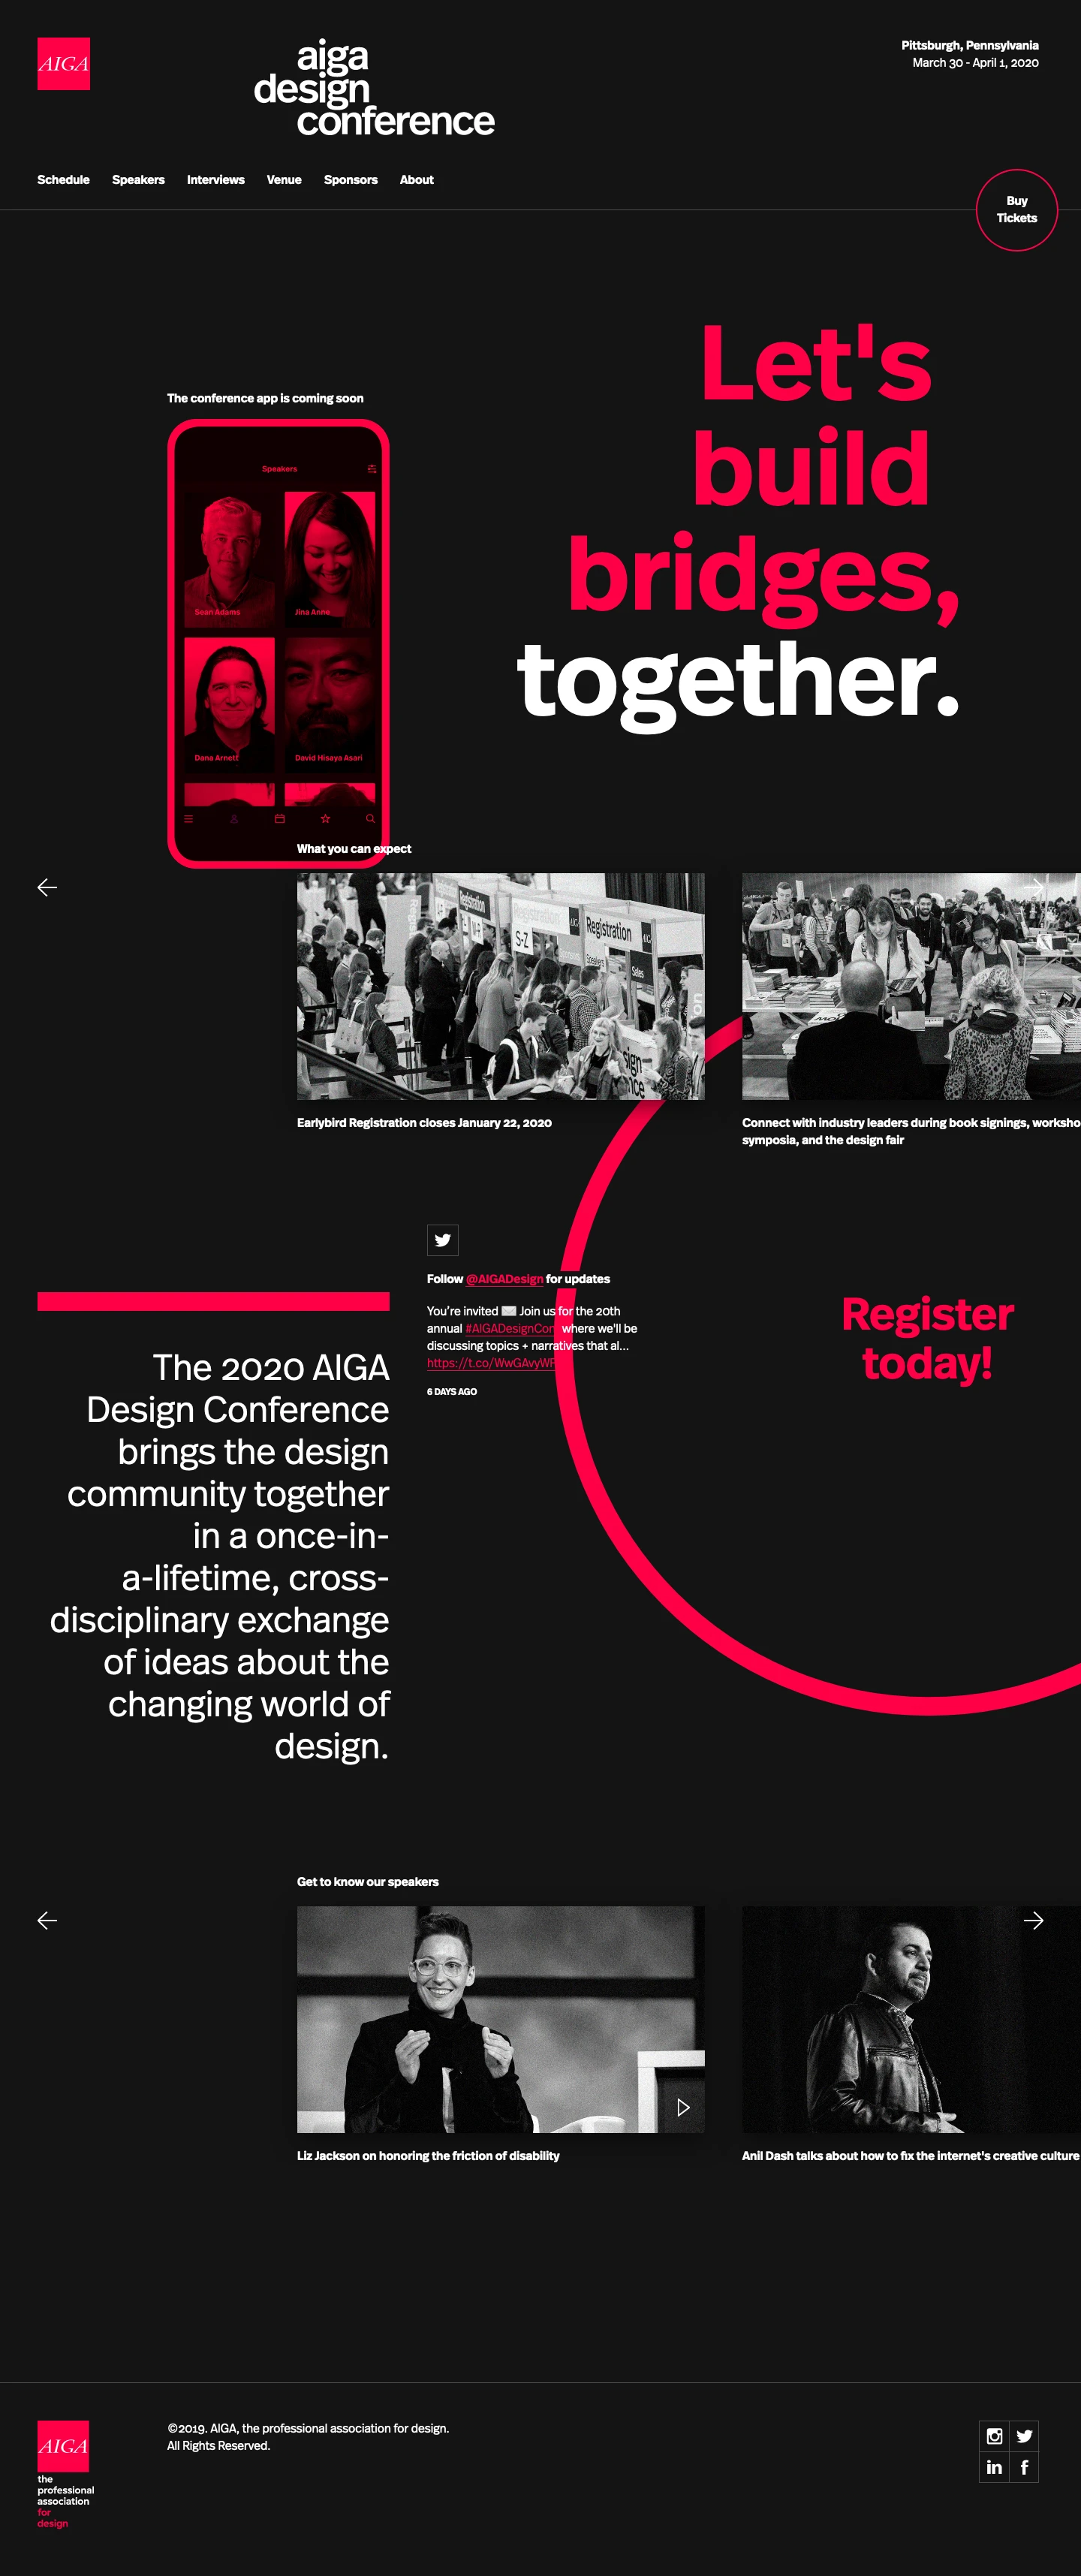 AIGA Design Conference Landing Page Example: The AIGA Design Conference is the biggest event of the year for creatives from all across the country. Be there as the design community comes together for provocative speakers, nightly networking receptions, live competitions, exhilarating exhibitions, innovative professional development sessions, and face-to-face roundtables with your design heroes.